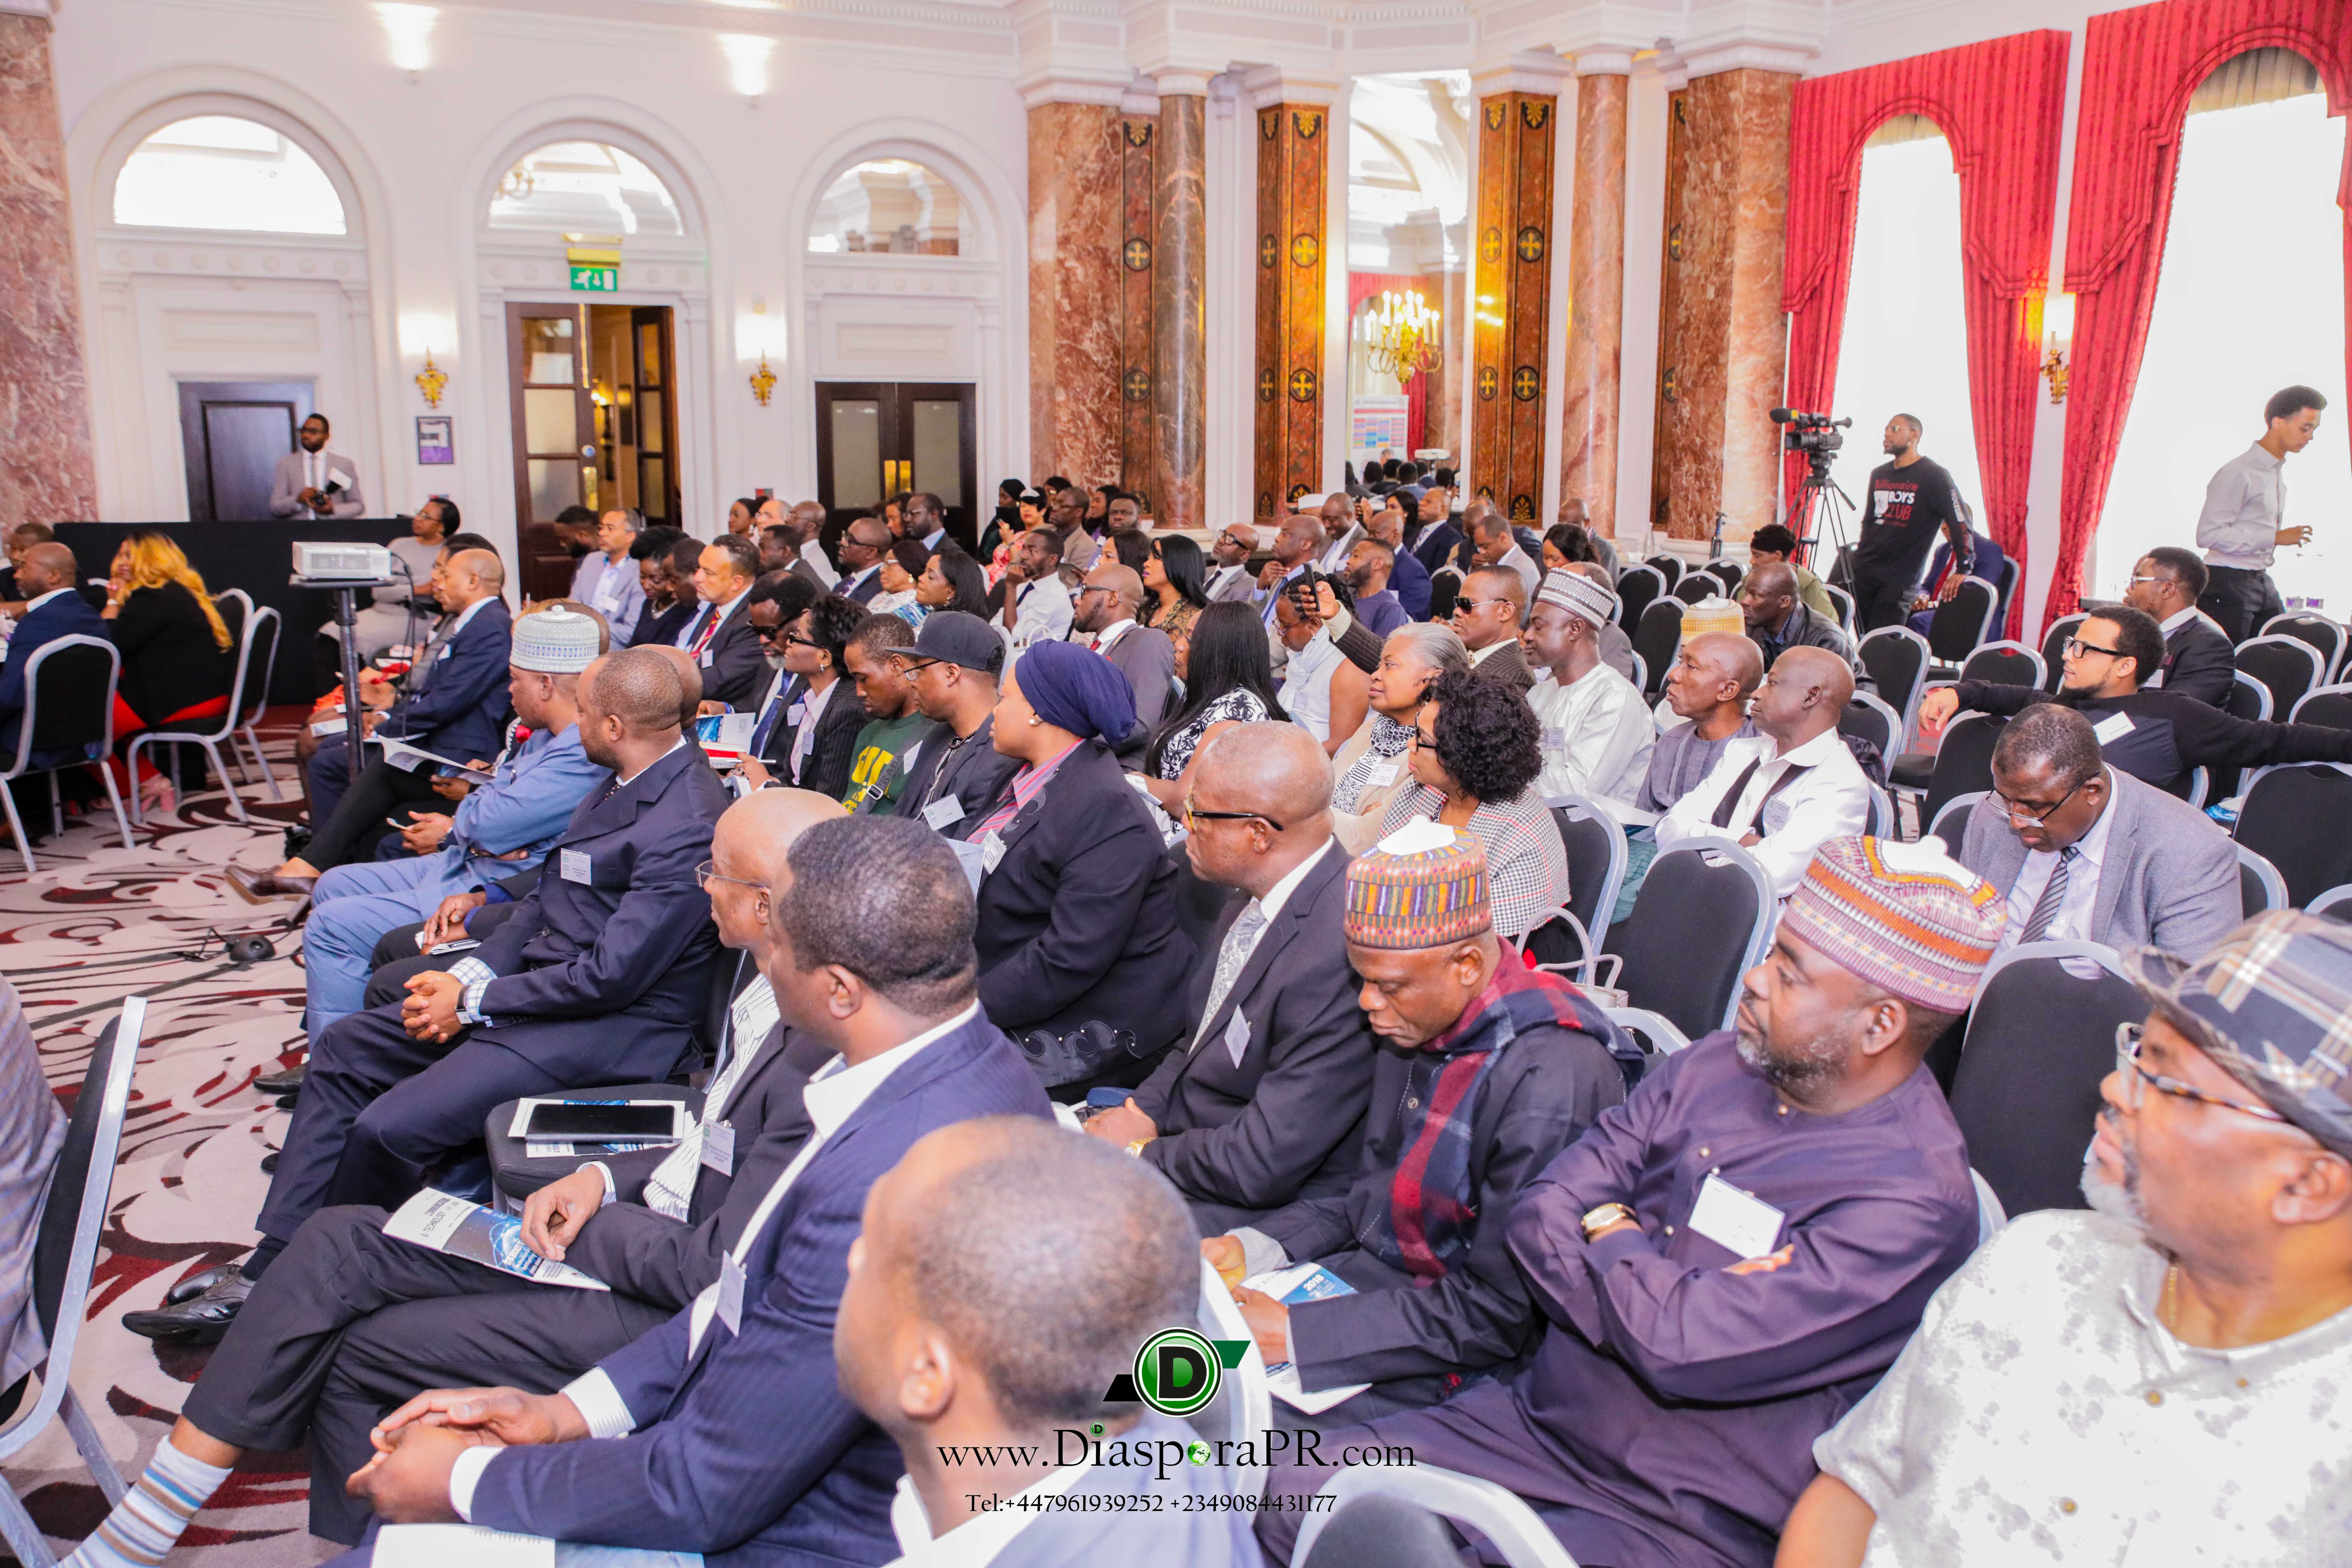 First-ever NDDIS Nigerian Communications Summit held in London, May 10th & 11th 2018